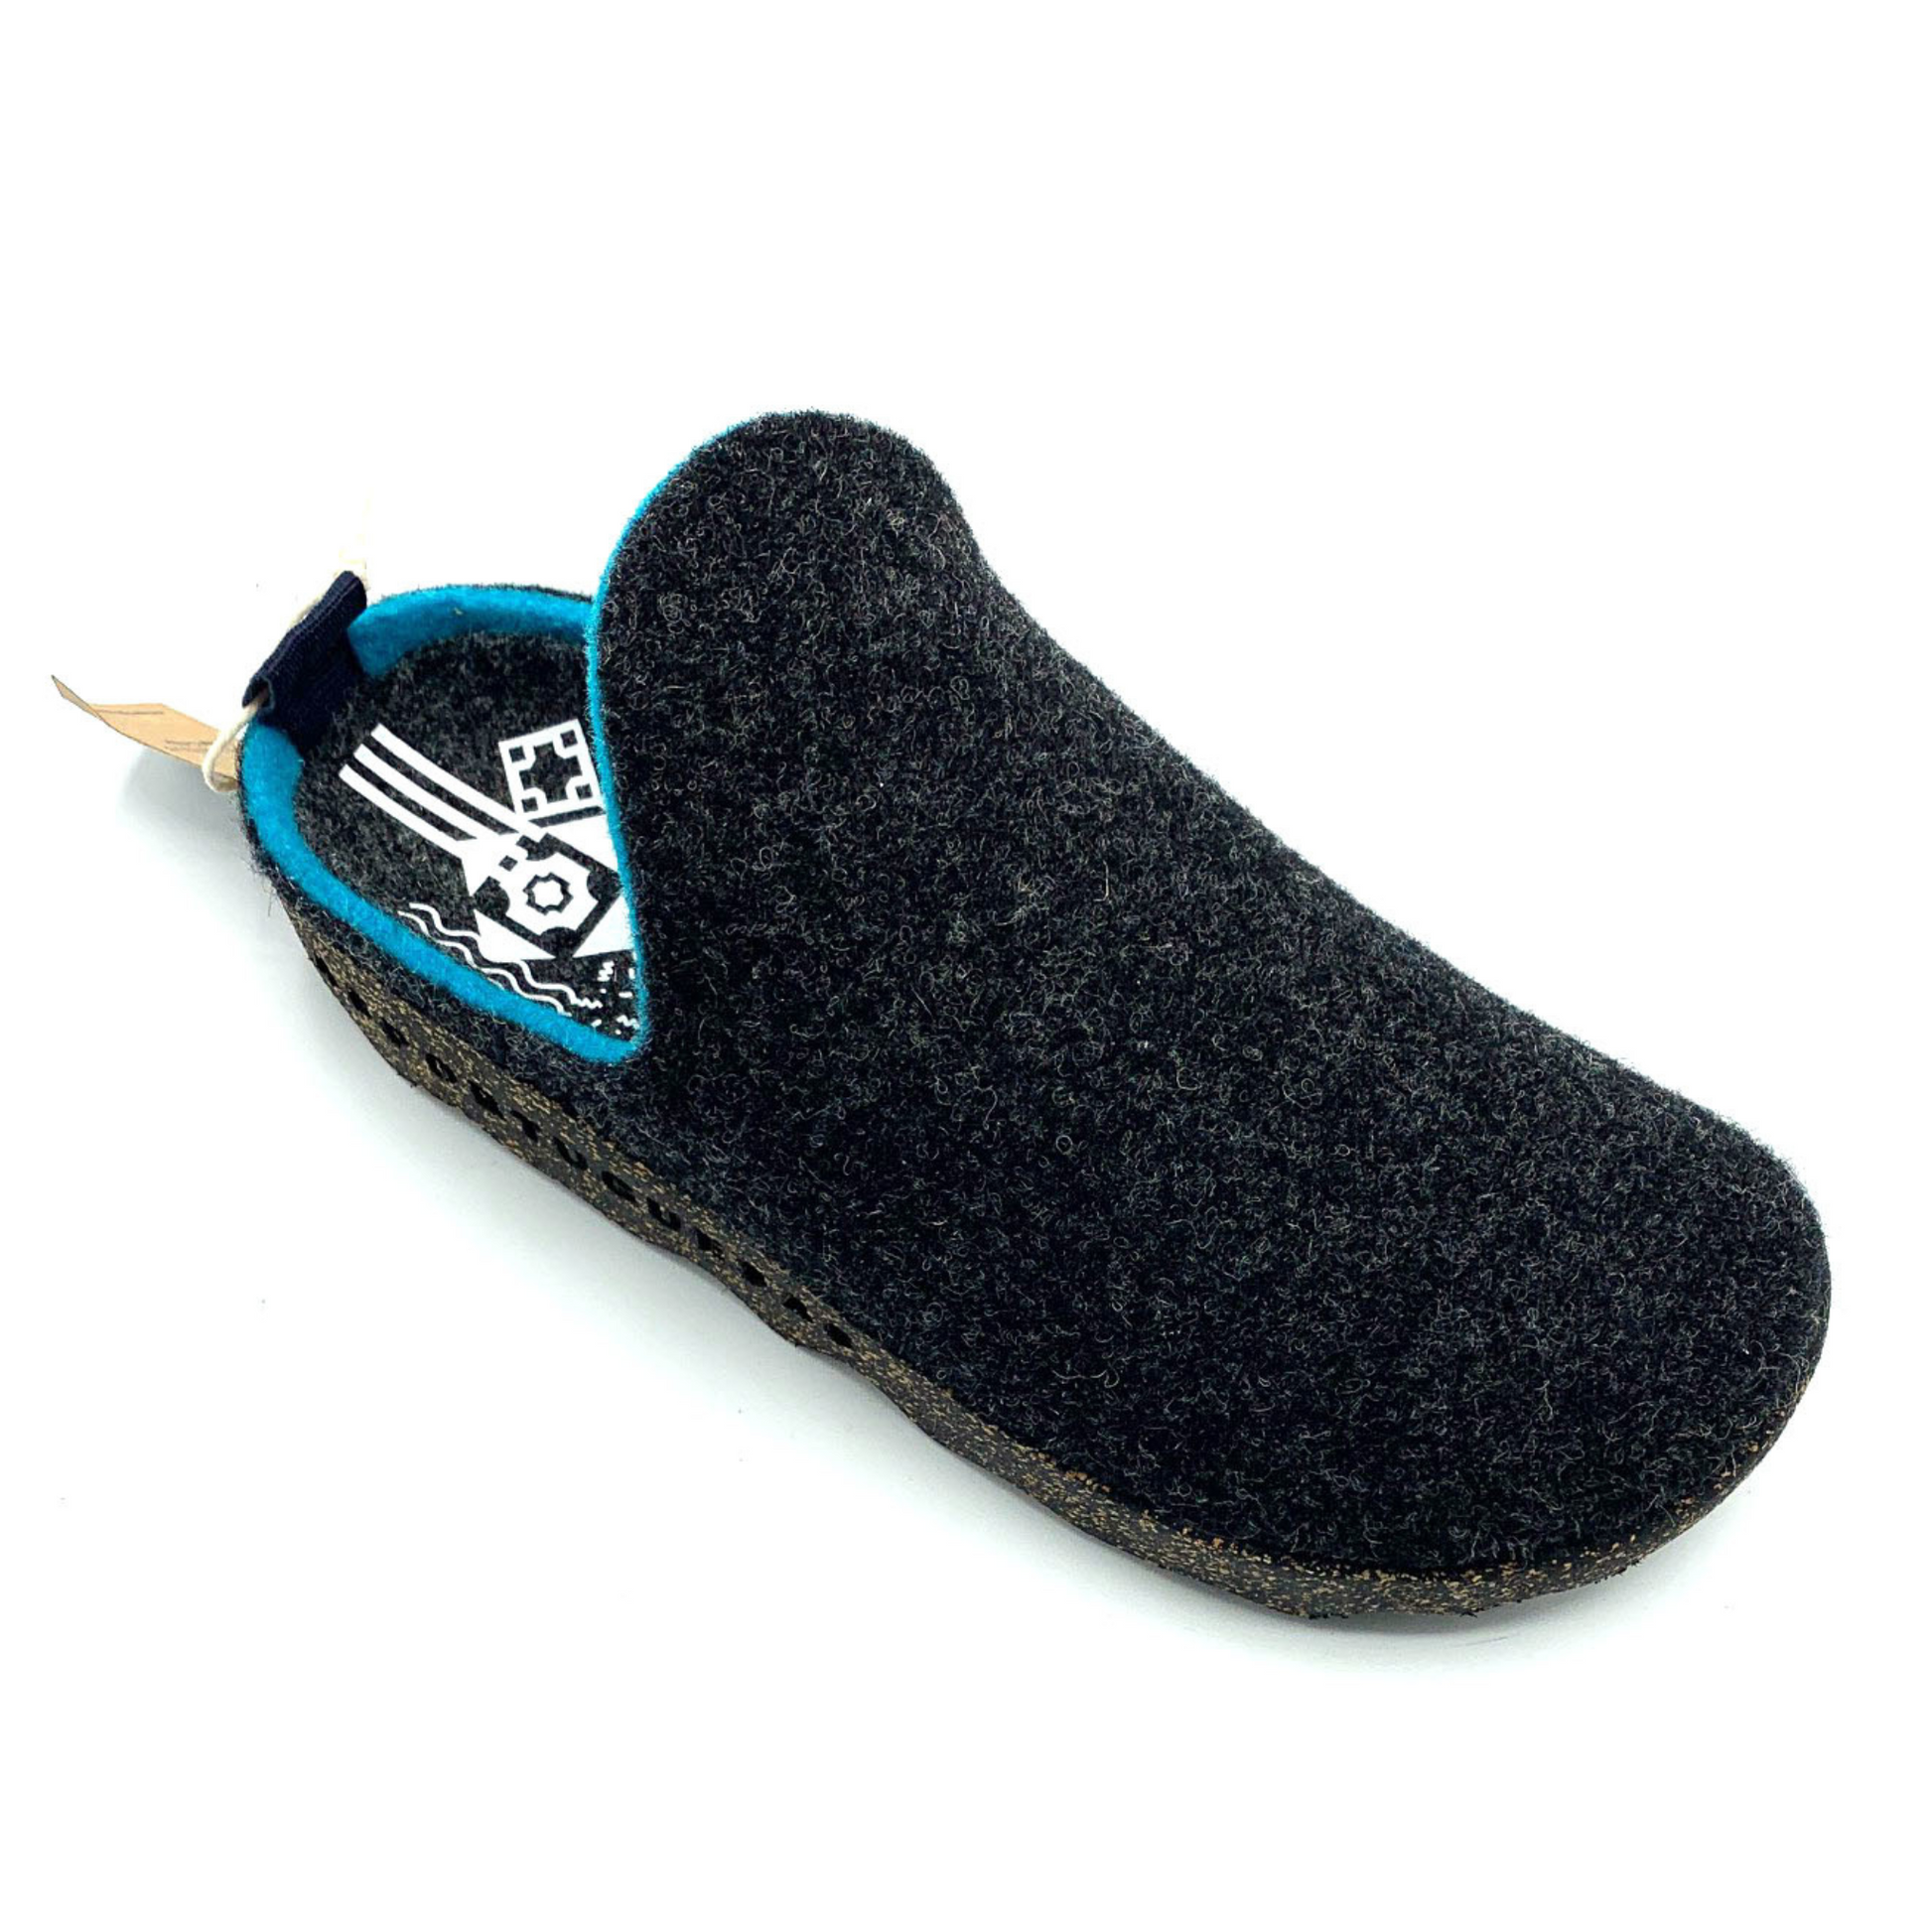 A blackish grey felted shoe with no heel is pictured from a front angle, there is electric blue lining around the opening for the foot and a white geometric pattern on the sole.